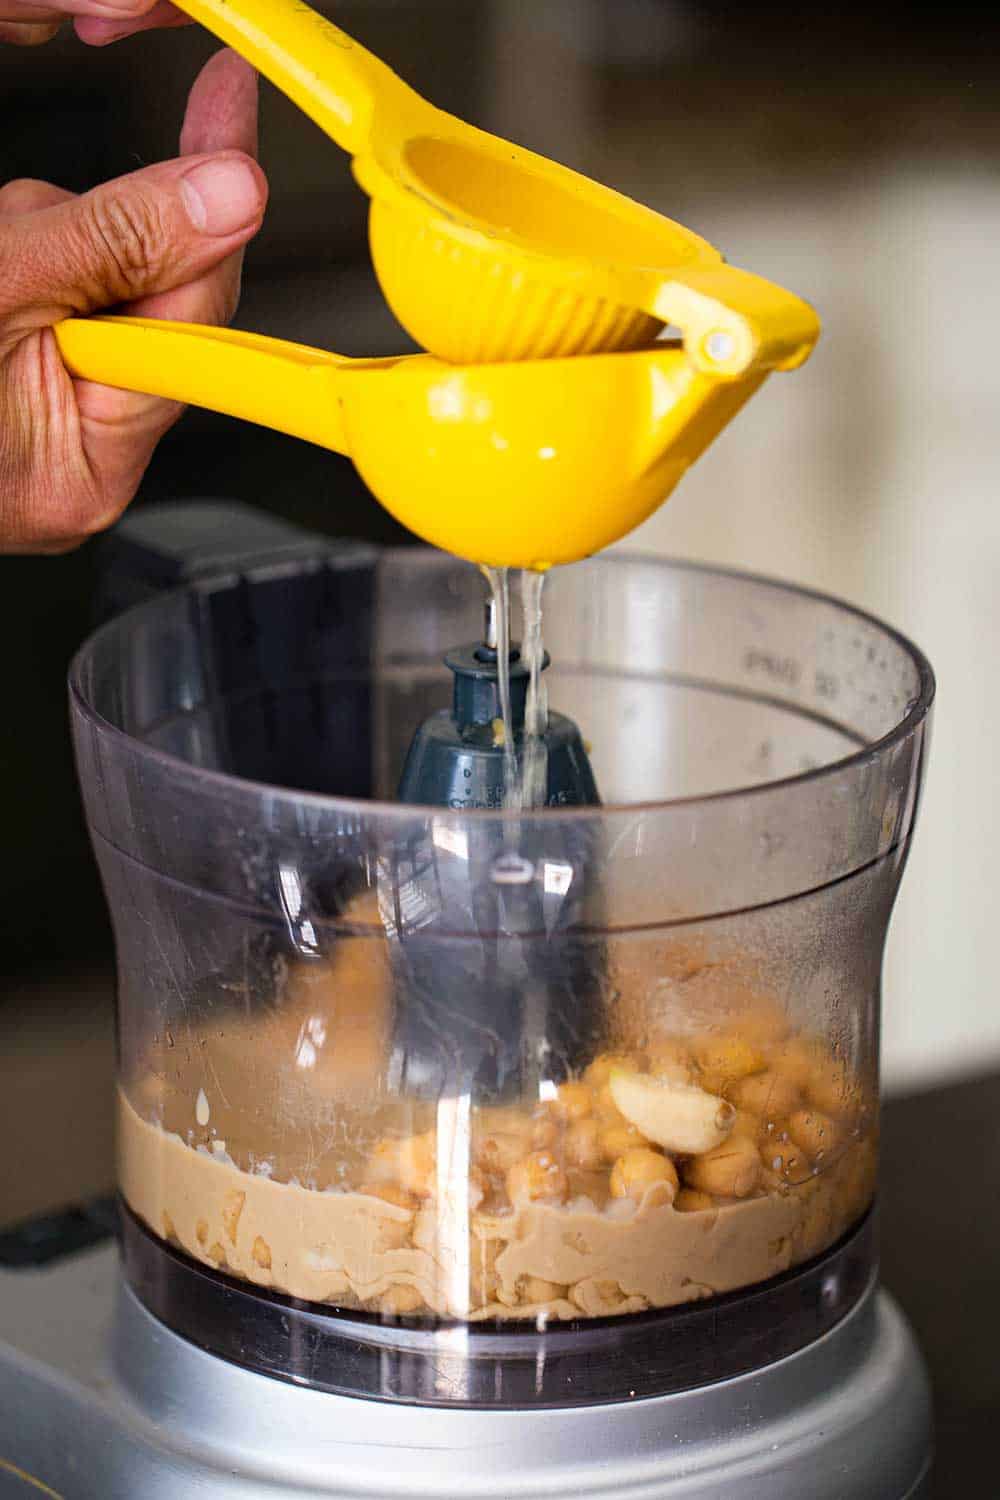 A person using a yellow citrus press to squeeze lemon juice from a lemon into a food processor filled with chickpeas and tahini for hummus. 